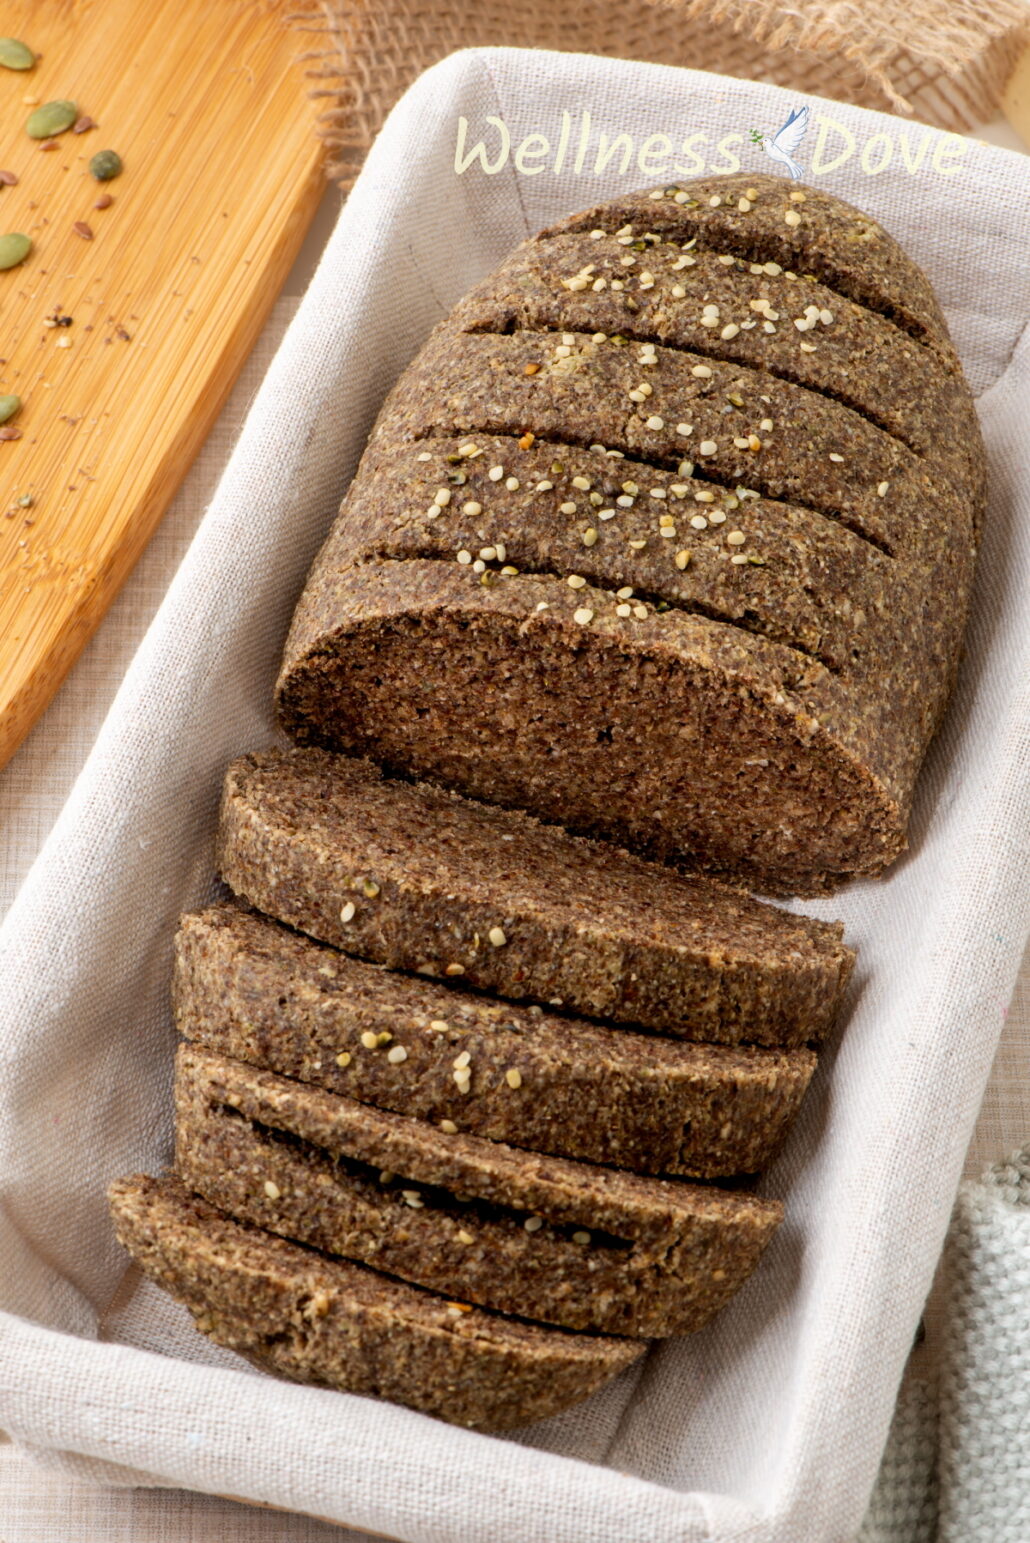 a photo of the vegan gluten free seeds bread in a basket